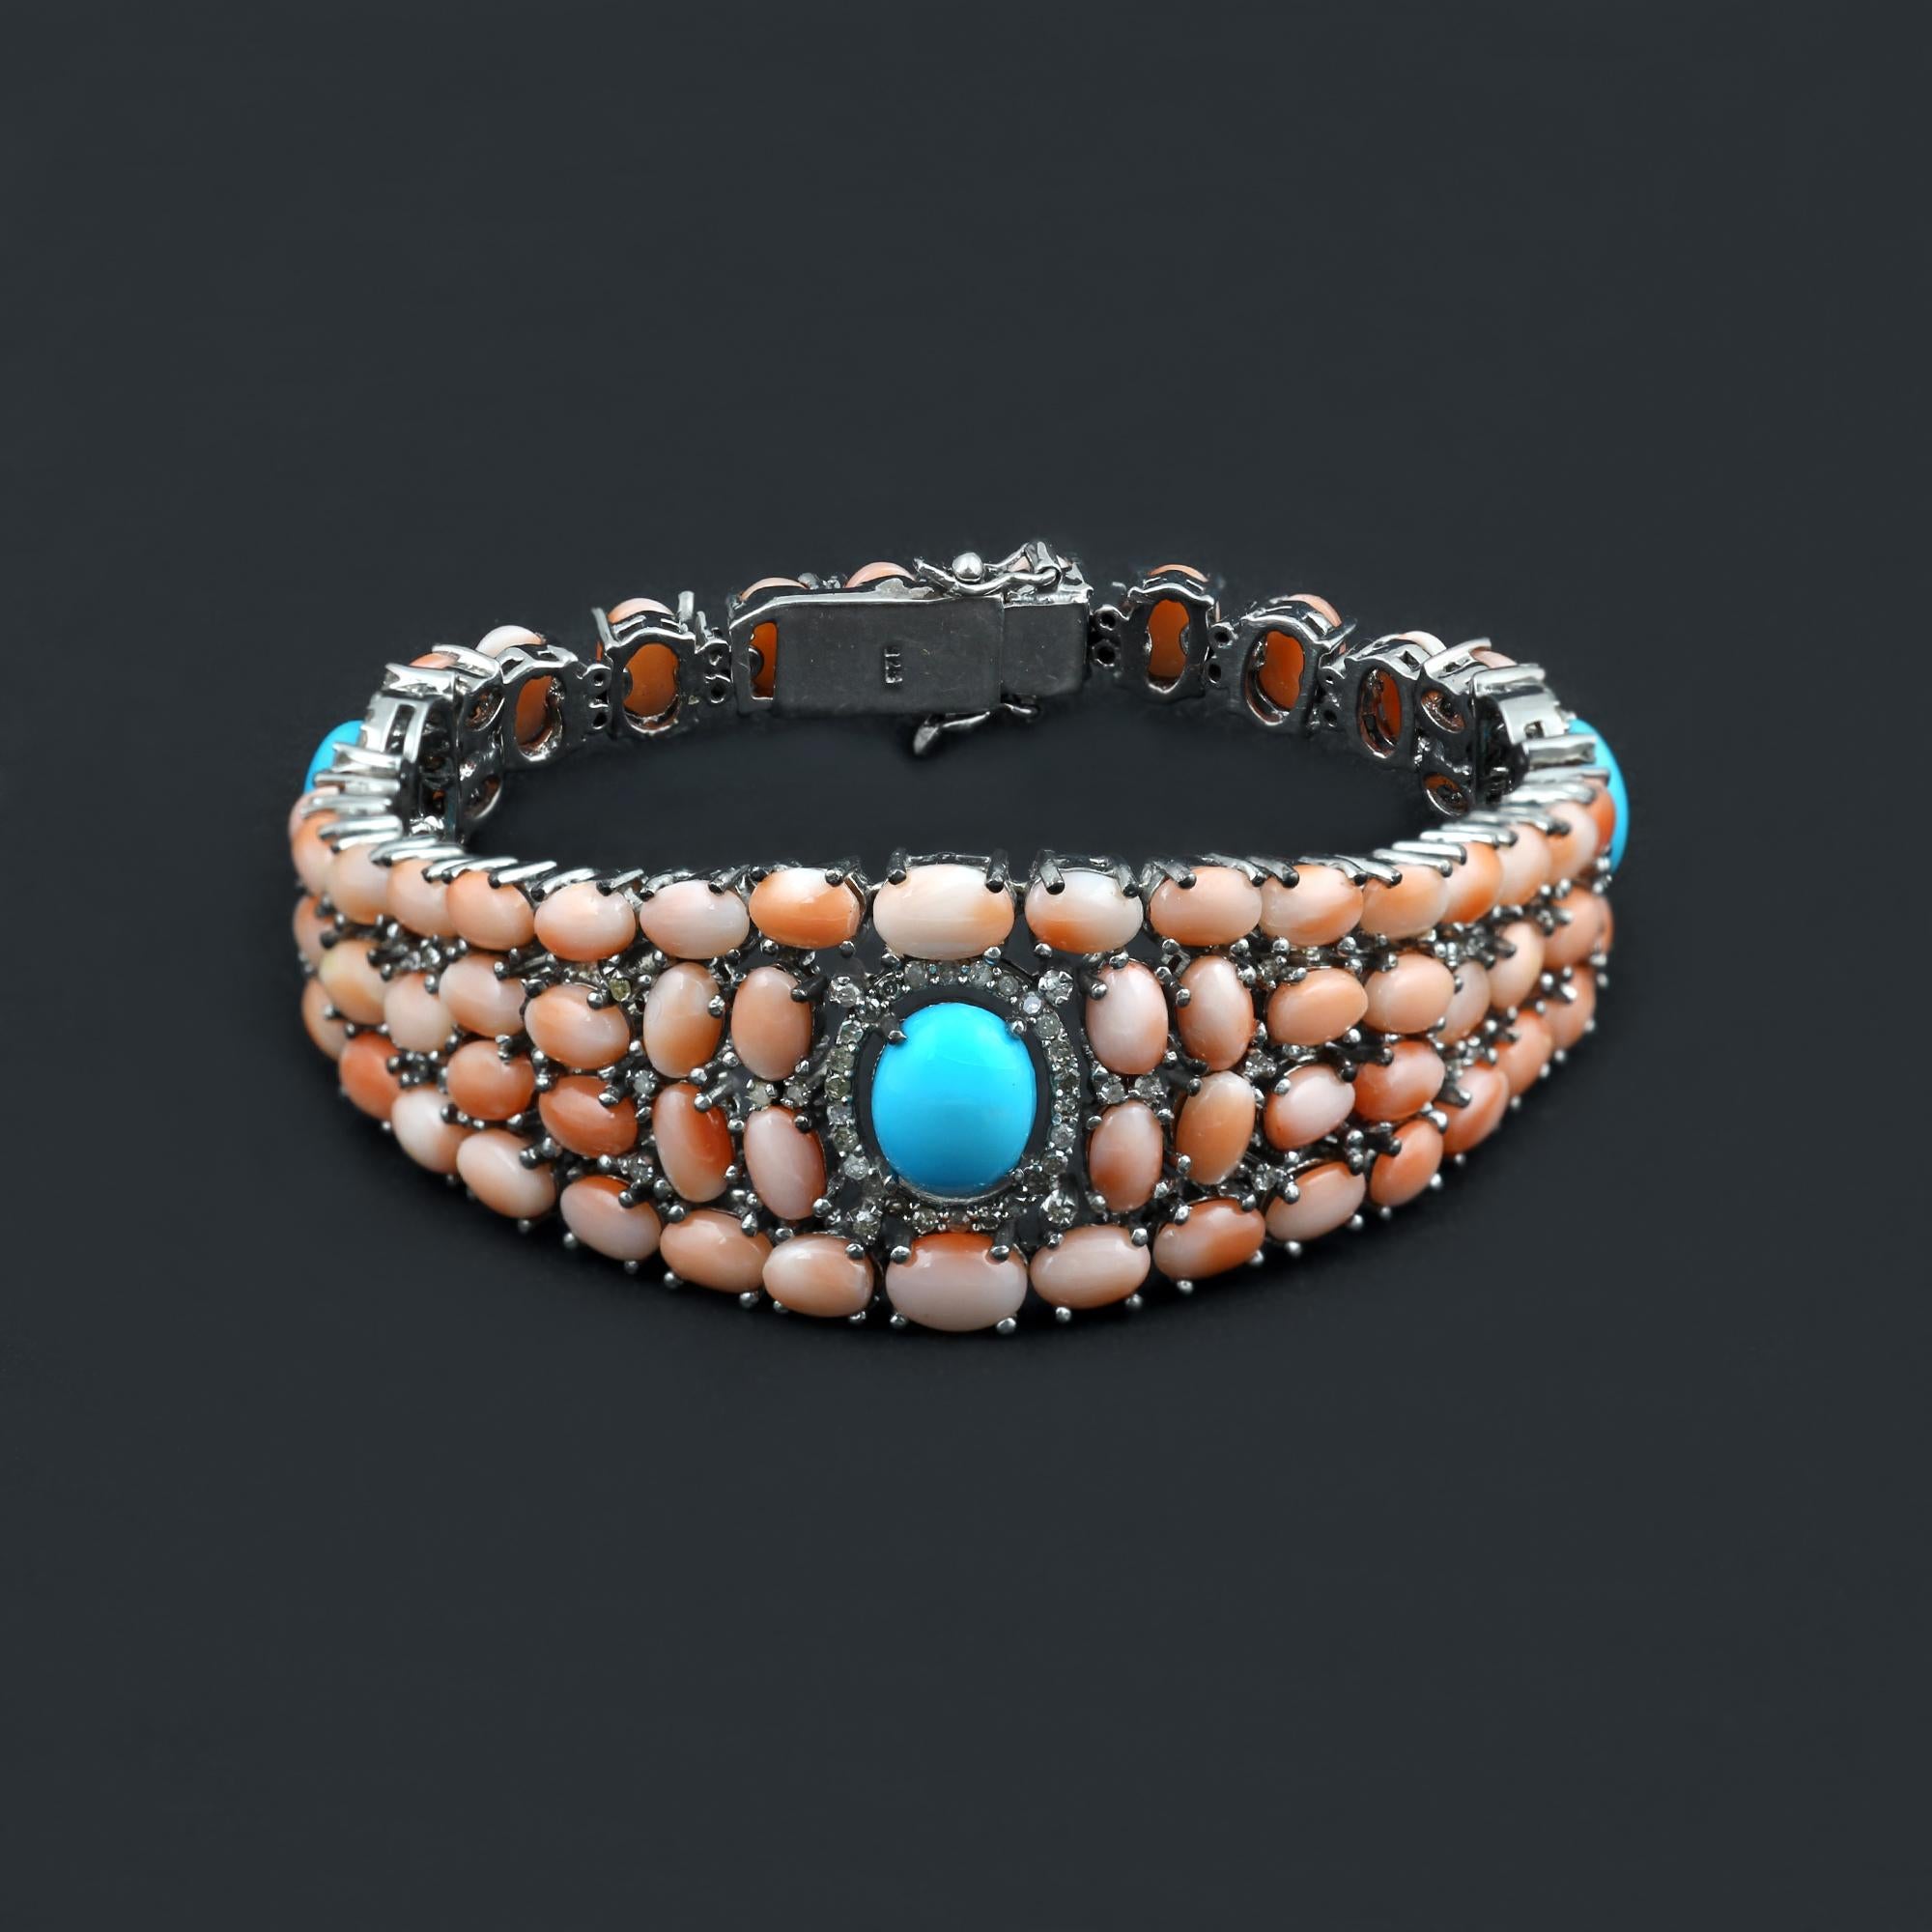 This one of a kind artisan made bracelet is beautiful to wear on any occasion. 
Made with 28 CT's of Natural Pink Corals, a rare gemstone, along with Big Sleeping beauty turquoise cabochons. 
Along with 1.5 Carats of the diamond, this bracelet is a